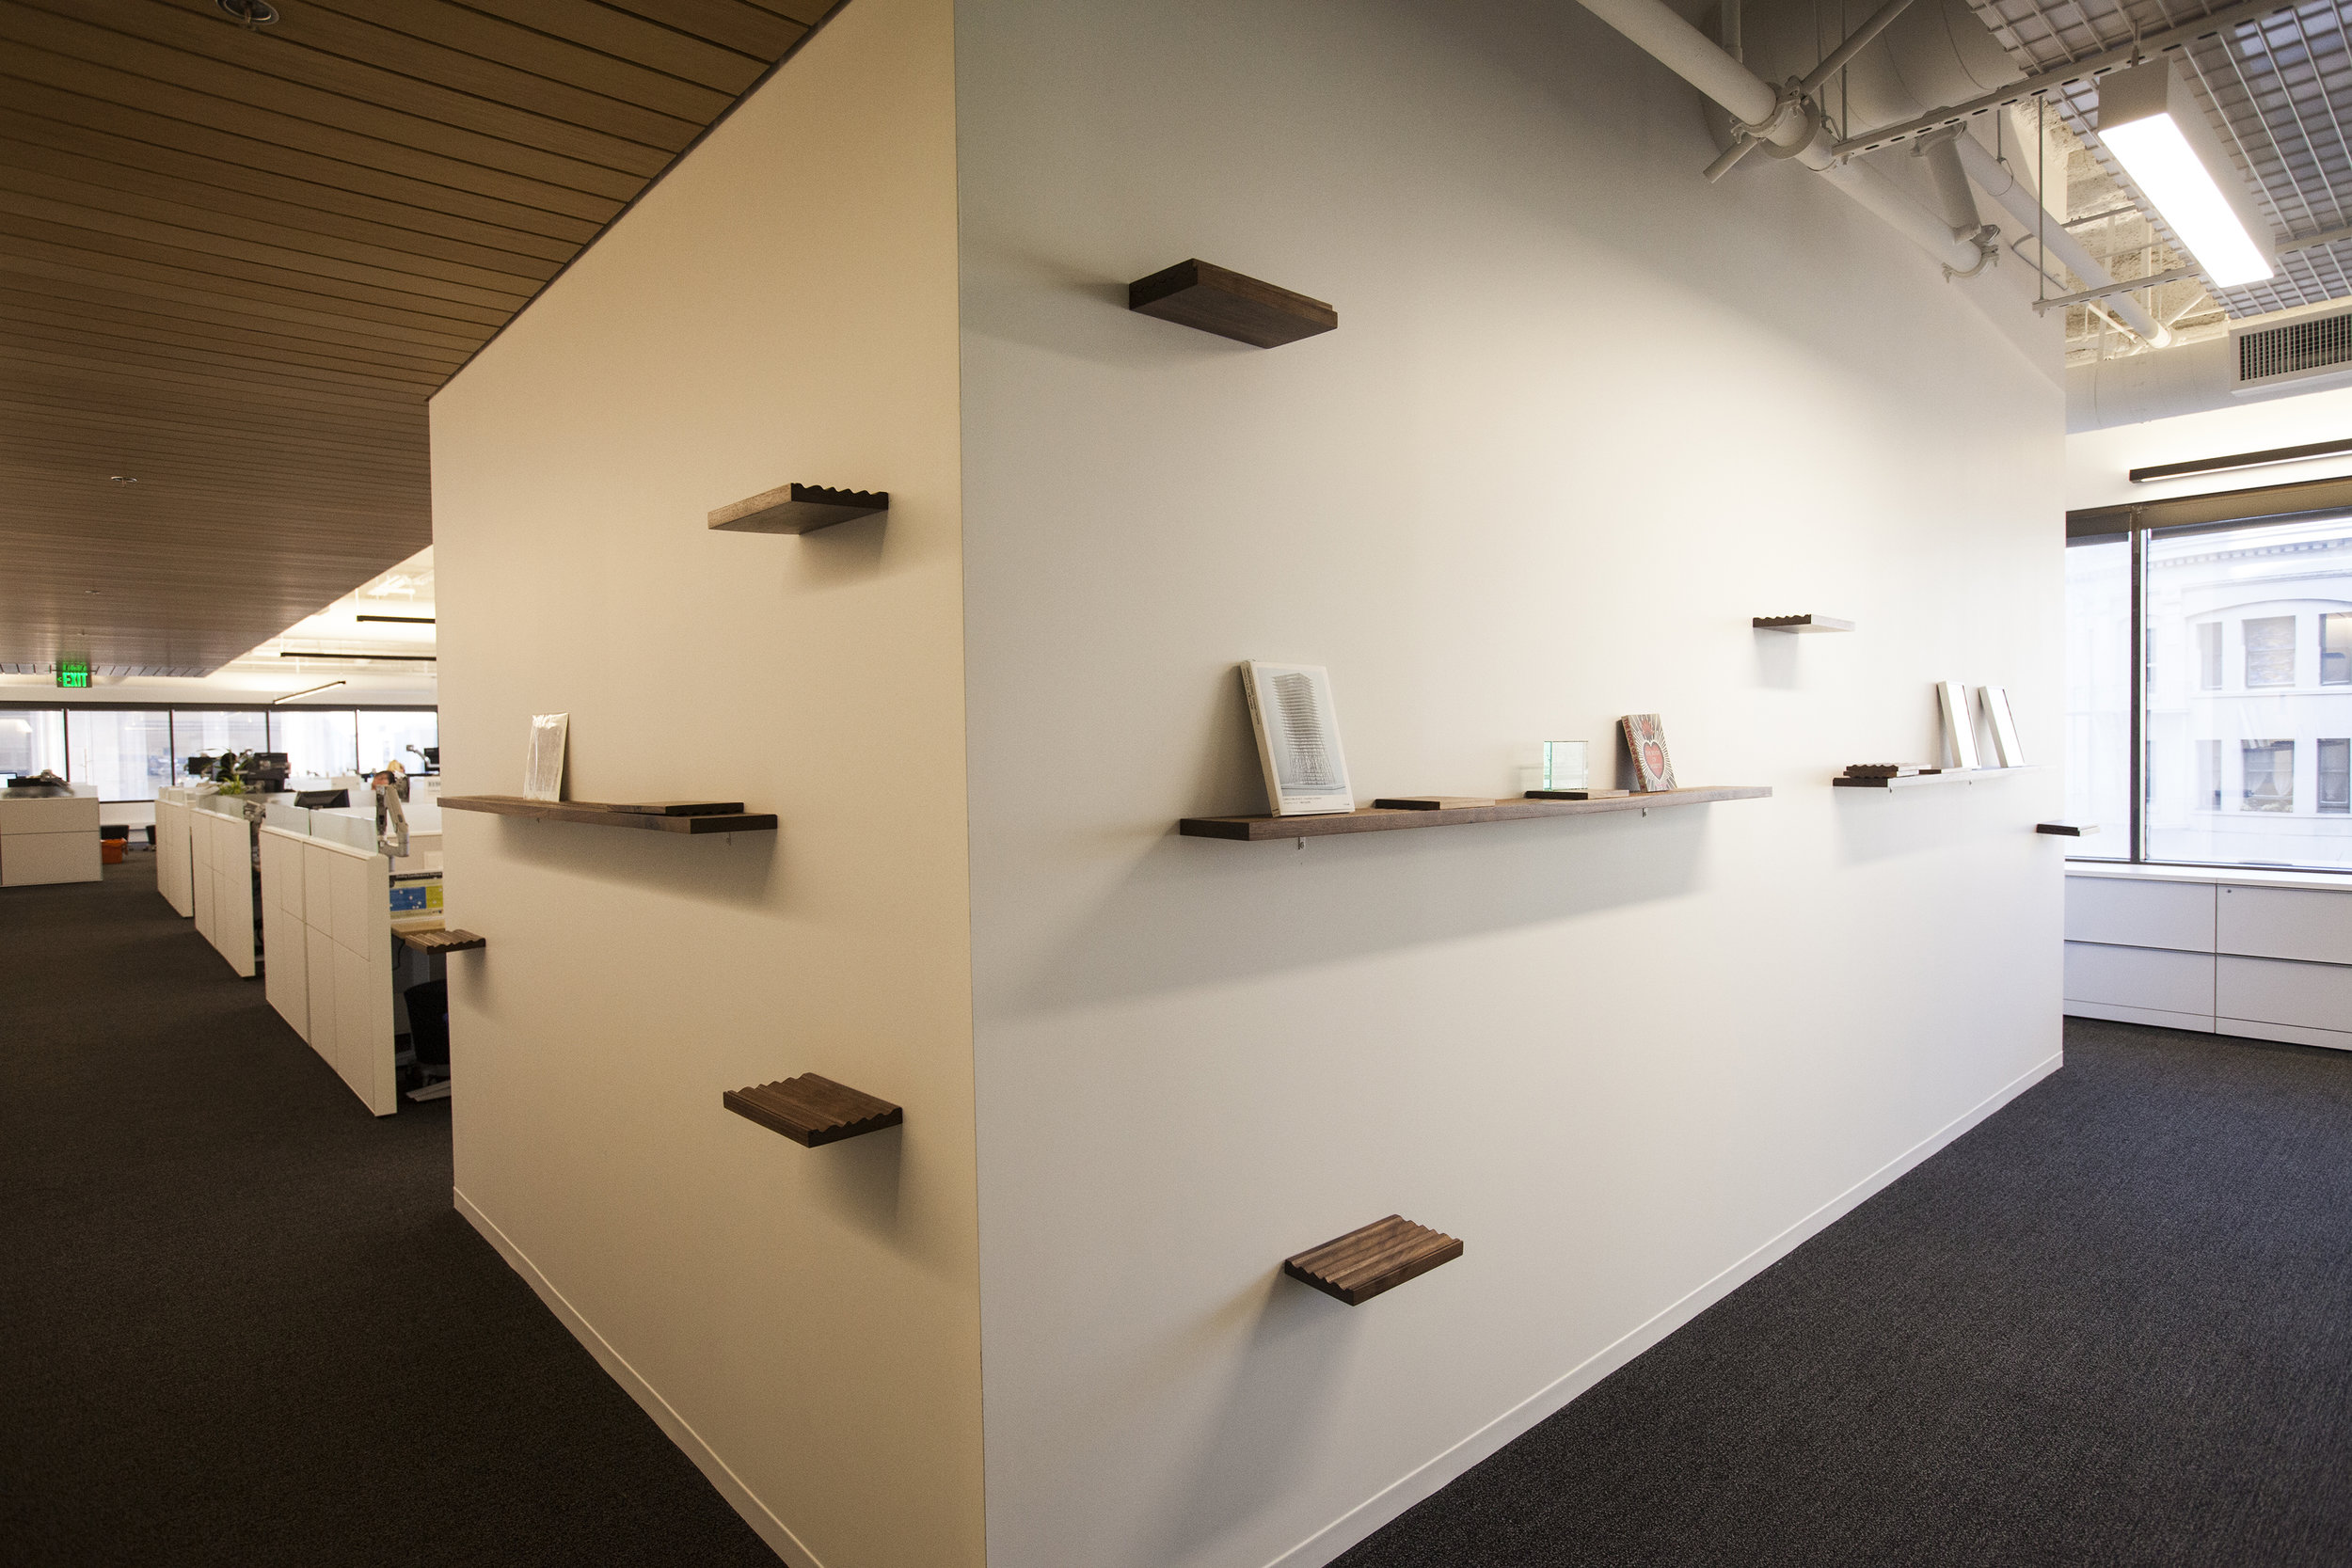  The shelves wrap the corners on both sides of this wall, and allow for fun display of their press materials and awards. 